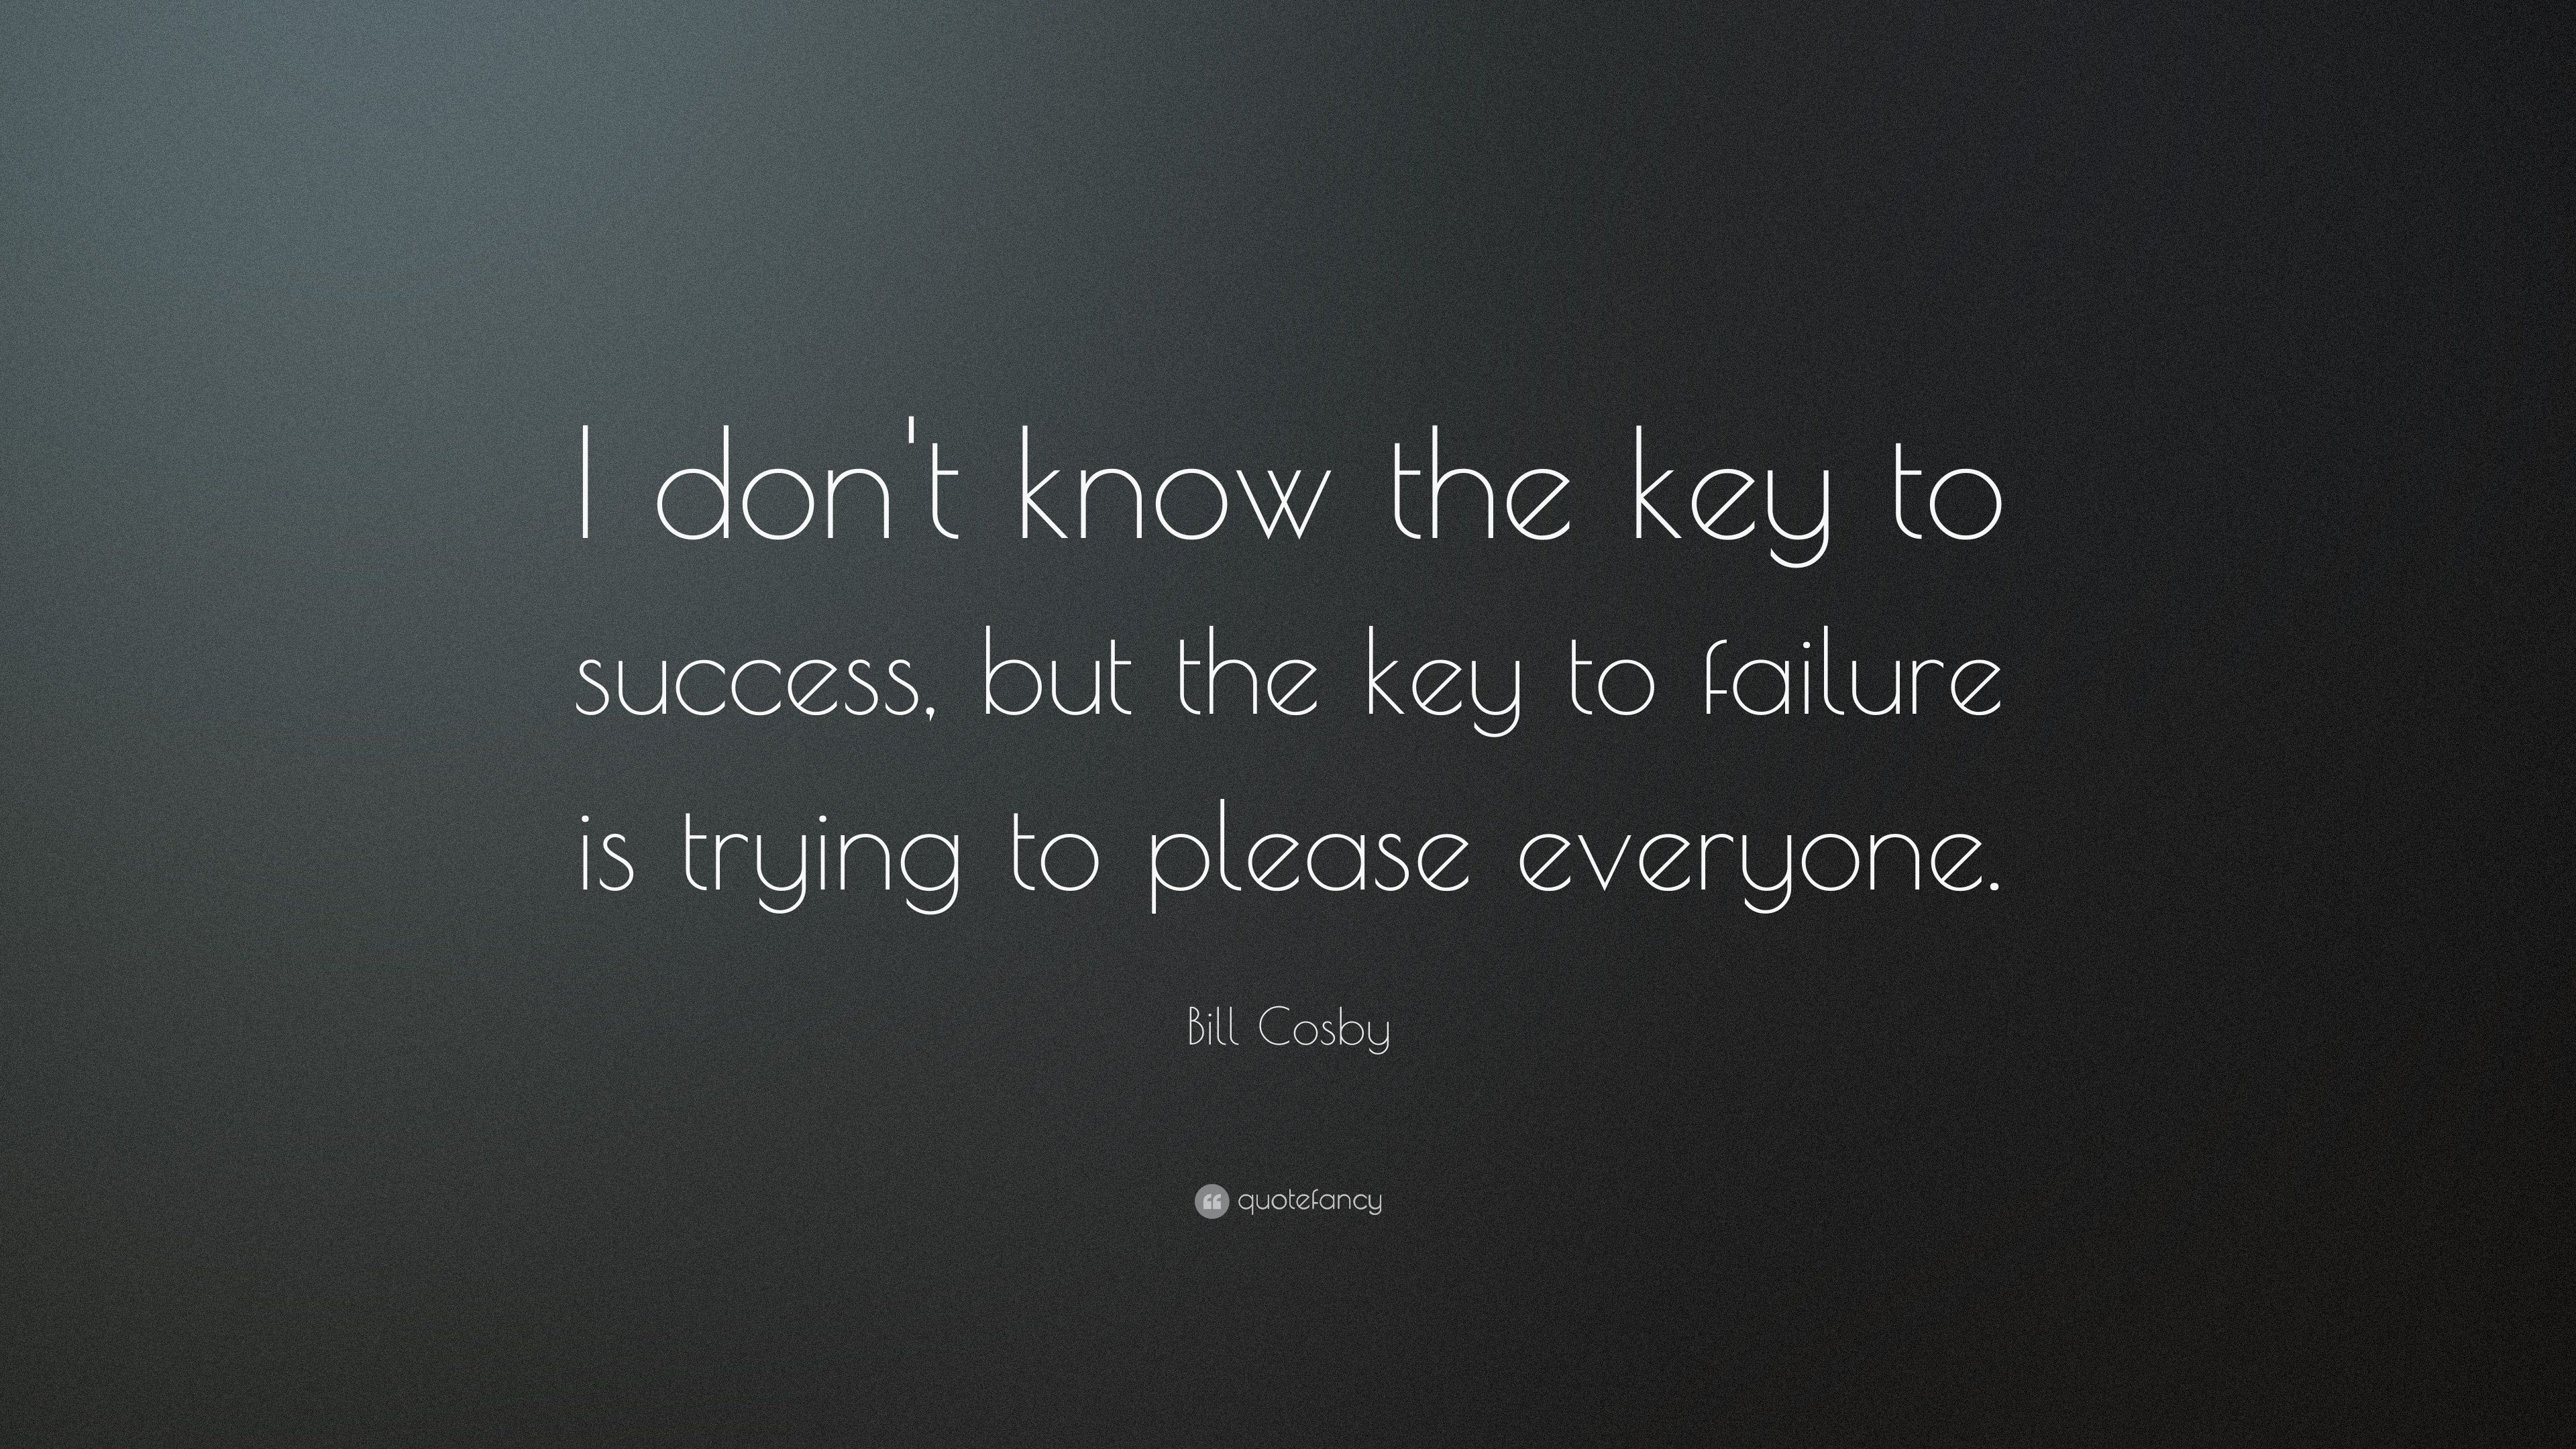 Bill Cosby Quote: “I don't know the key to success, but the key to